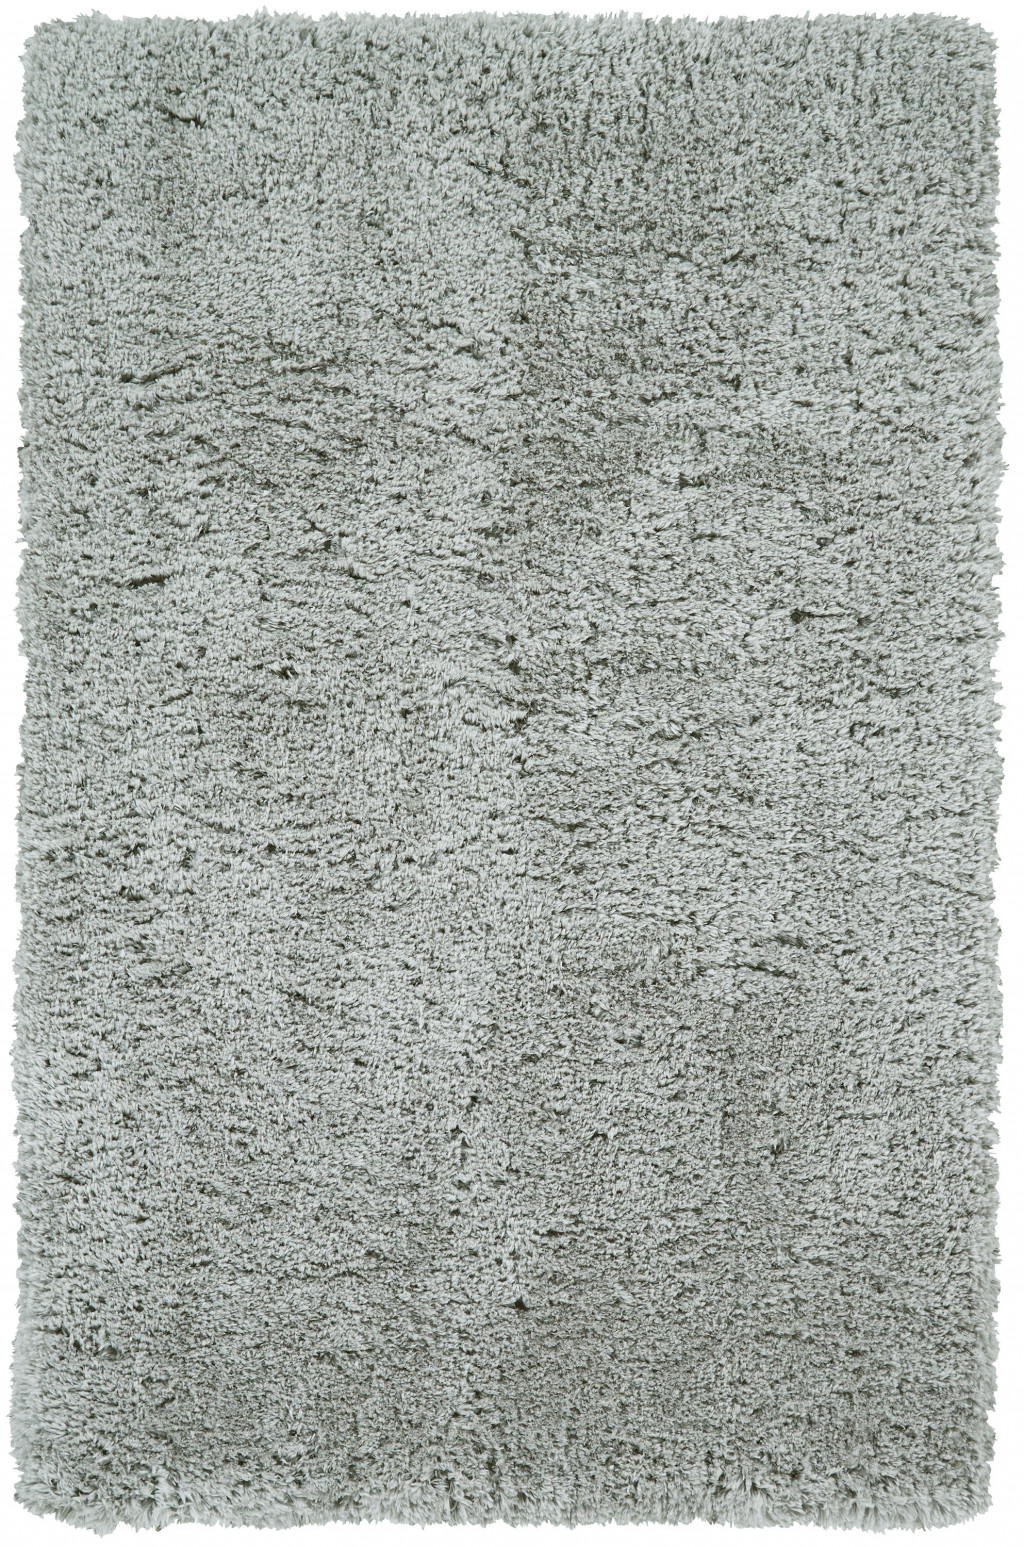 10' X 13' Gray Silver And Taupe Shag Tufted Handmade Stain Resistant Area Rug-511120-1